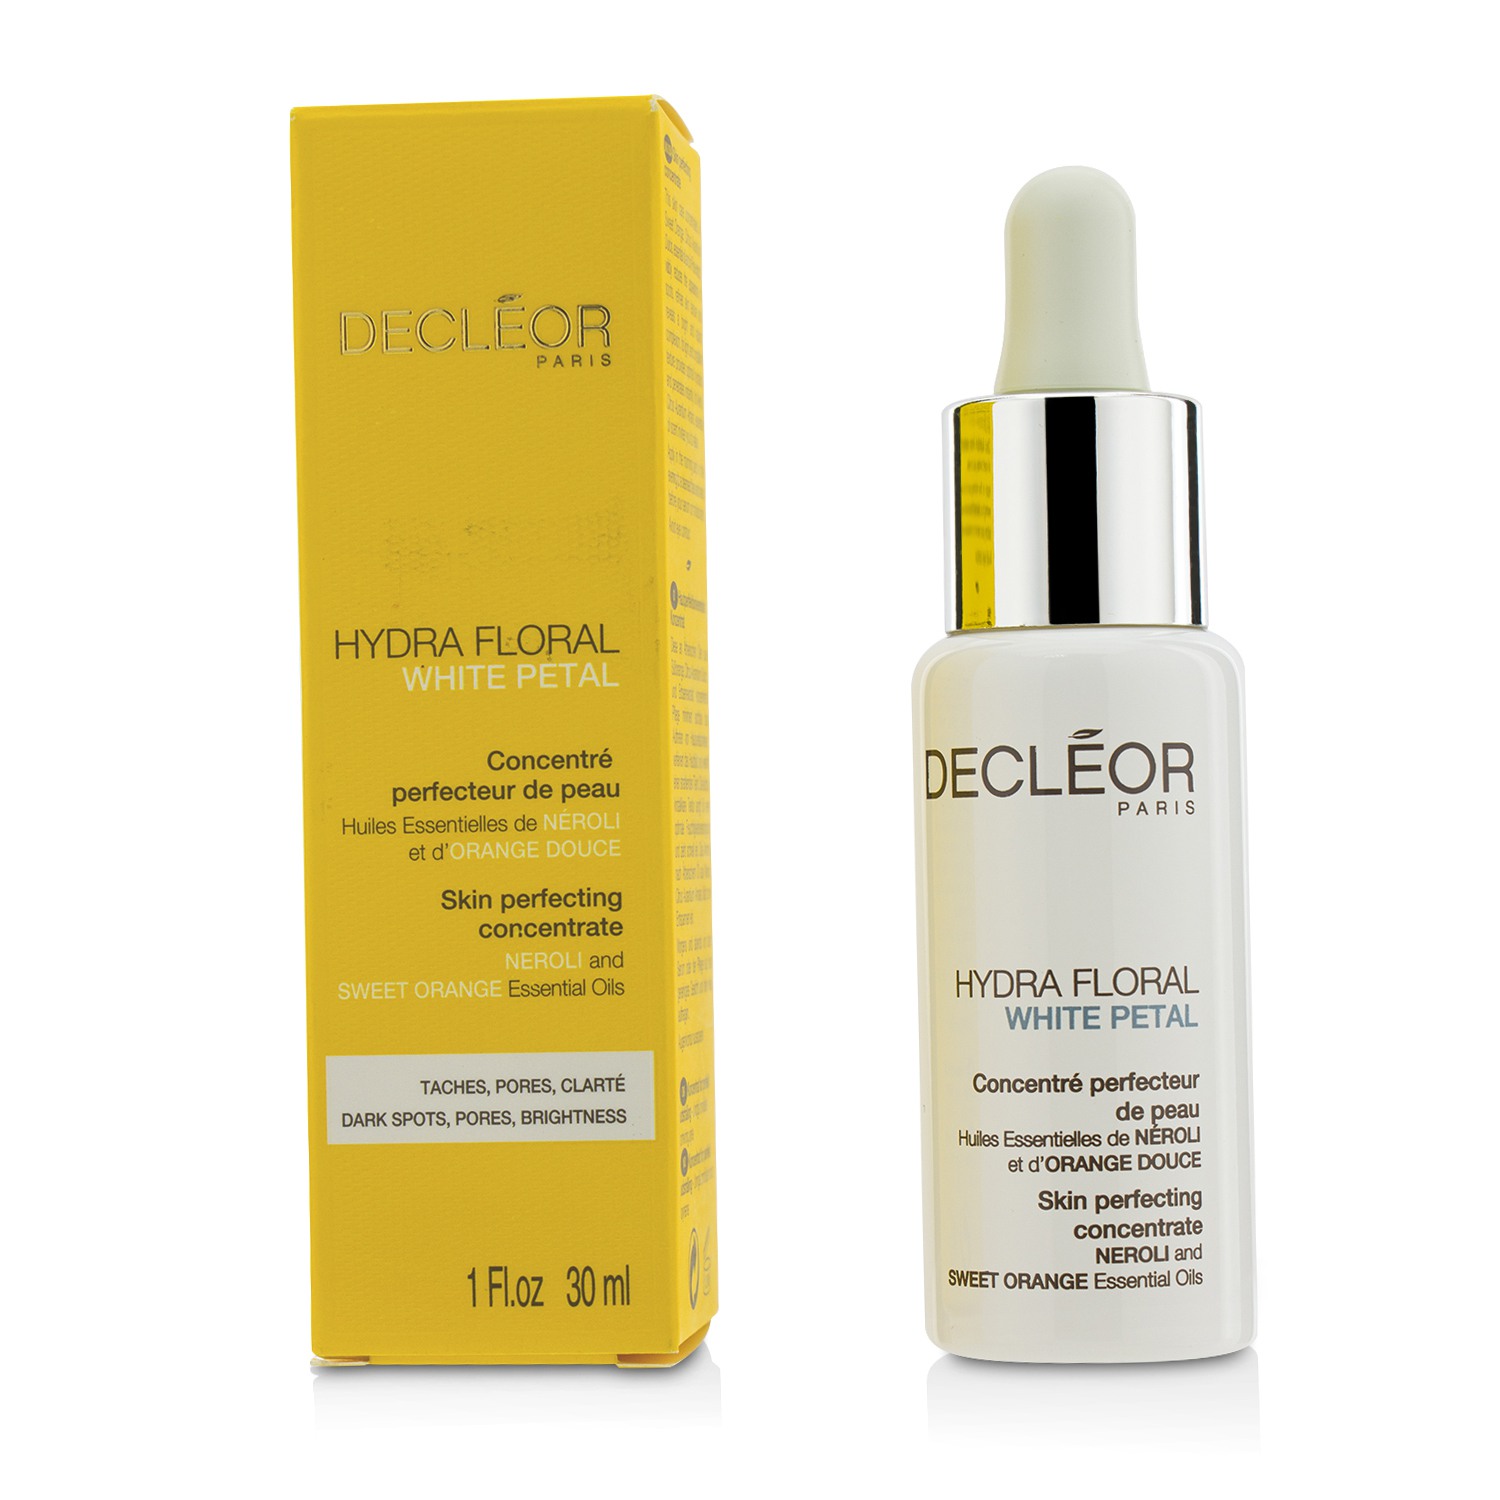 Hydra Floral White Petal Neroli & Sweet Orange Skin Perfecting Concentrate Decleor Image